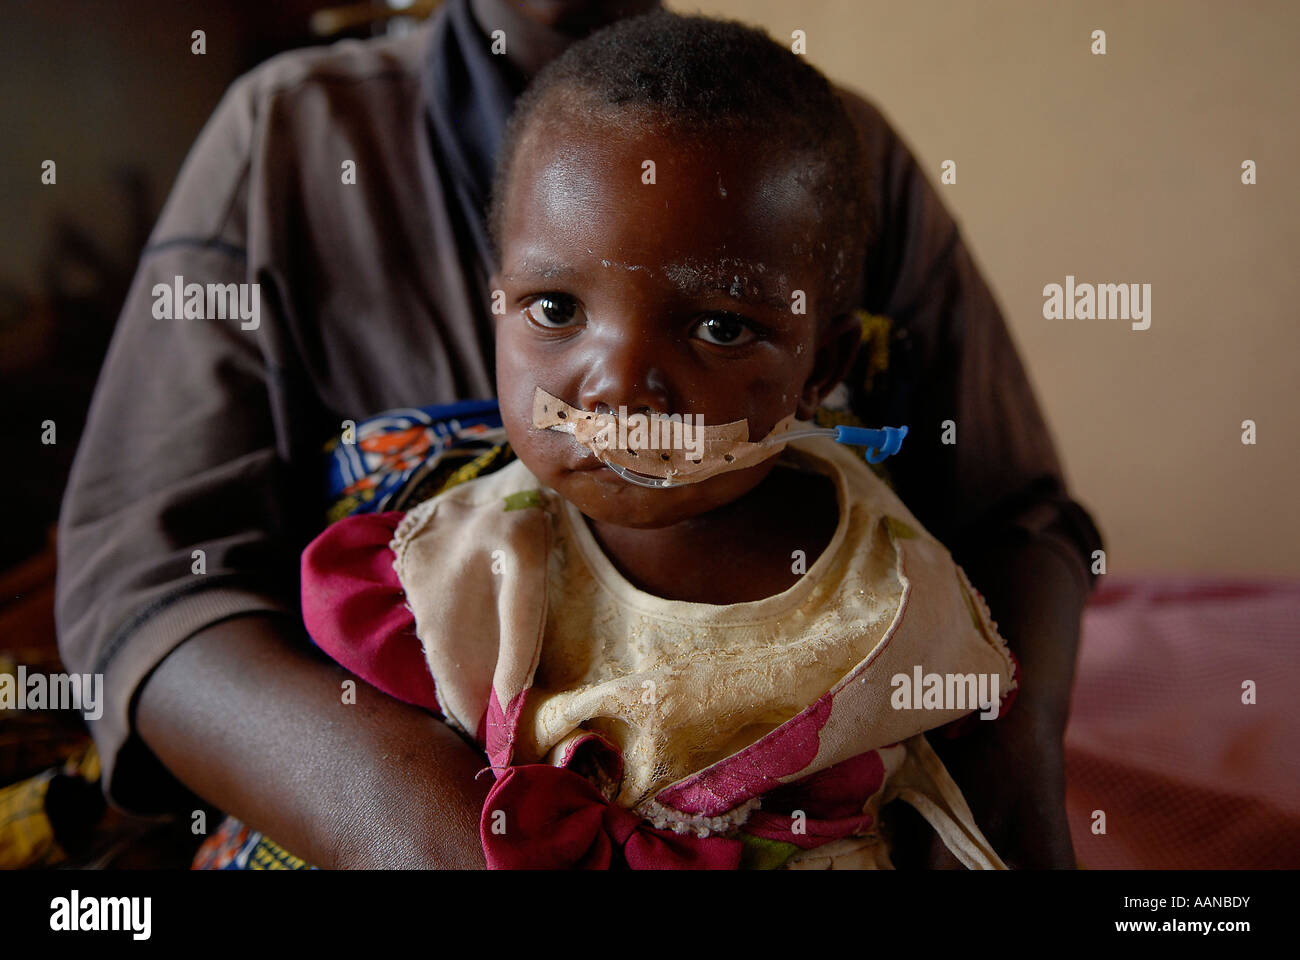 A malnourished child with feeding tube in his mouth at a CARITAS supported nutrition centre in North Kivu province in DR Congo Africa Stock Photo